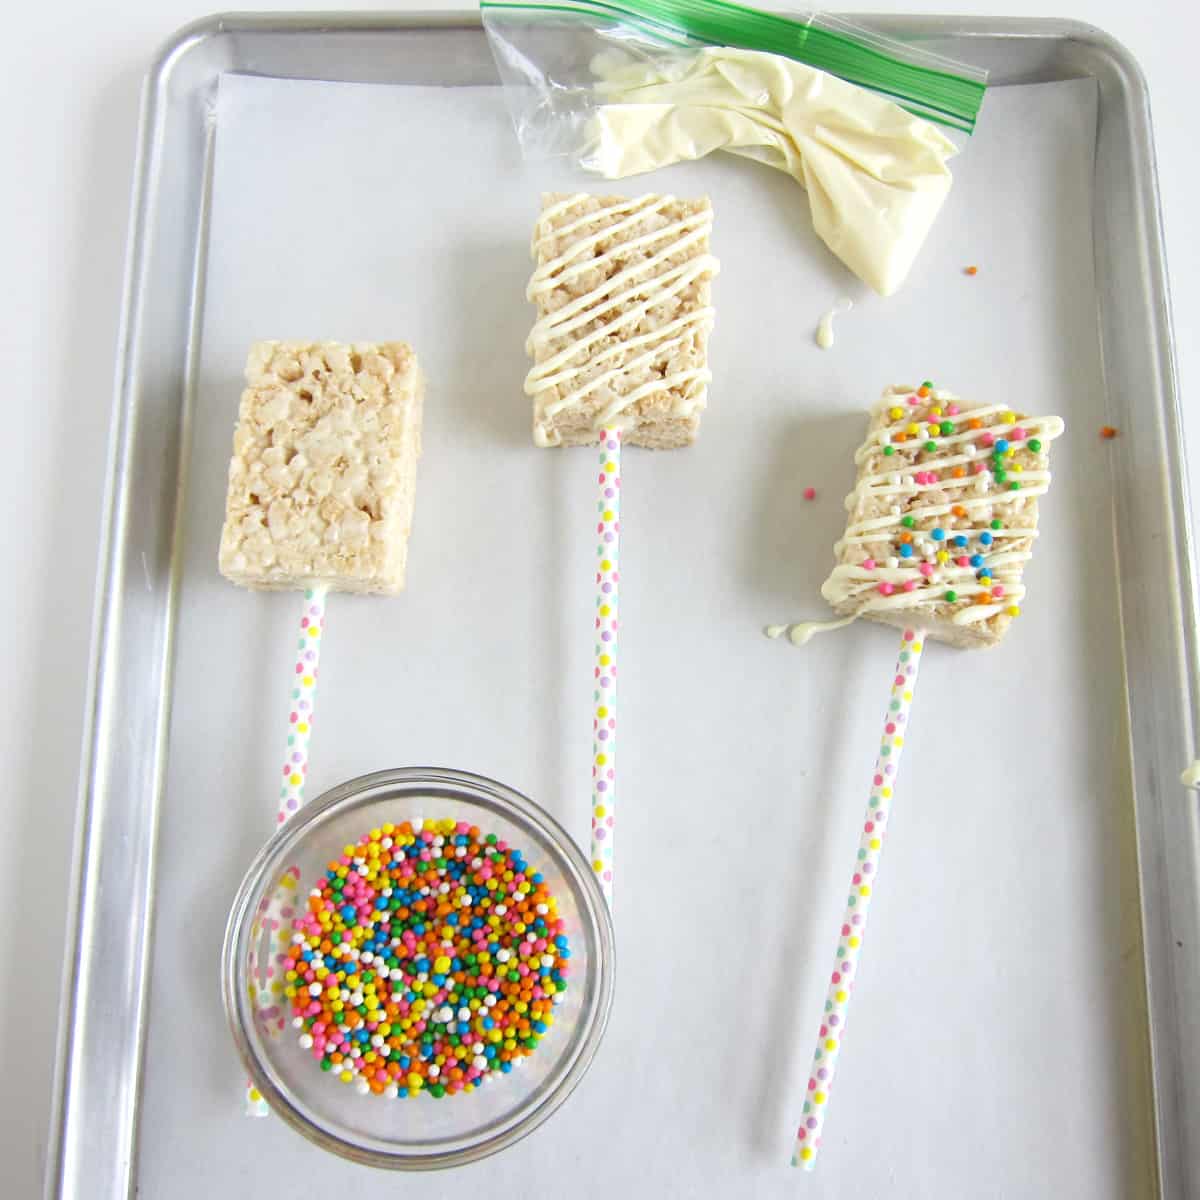 Plain rice krispie treat, one drizzled with white chocolate, and one topped with rainbow Crispearls sprinkles next to a bowl of Crispearls and a zip-top bag of melted white chocolate.